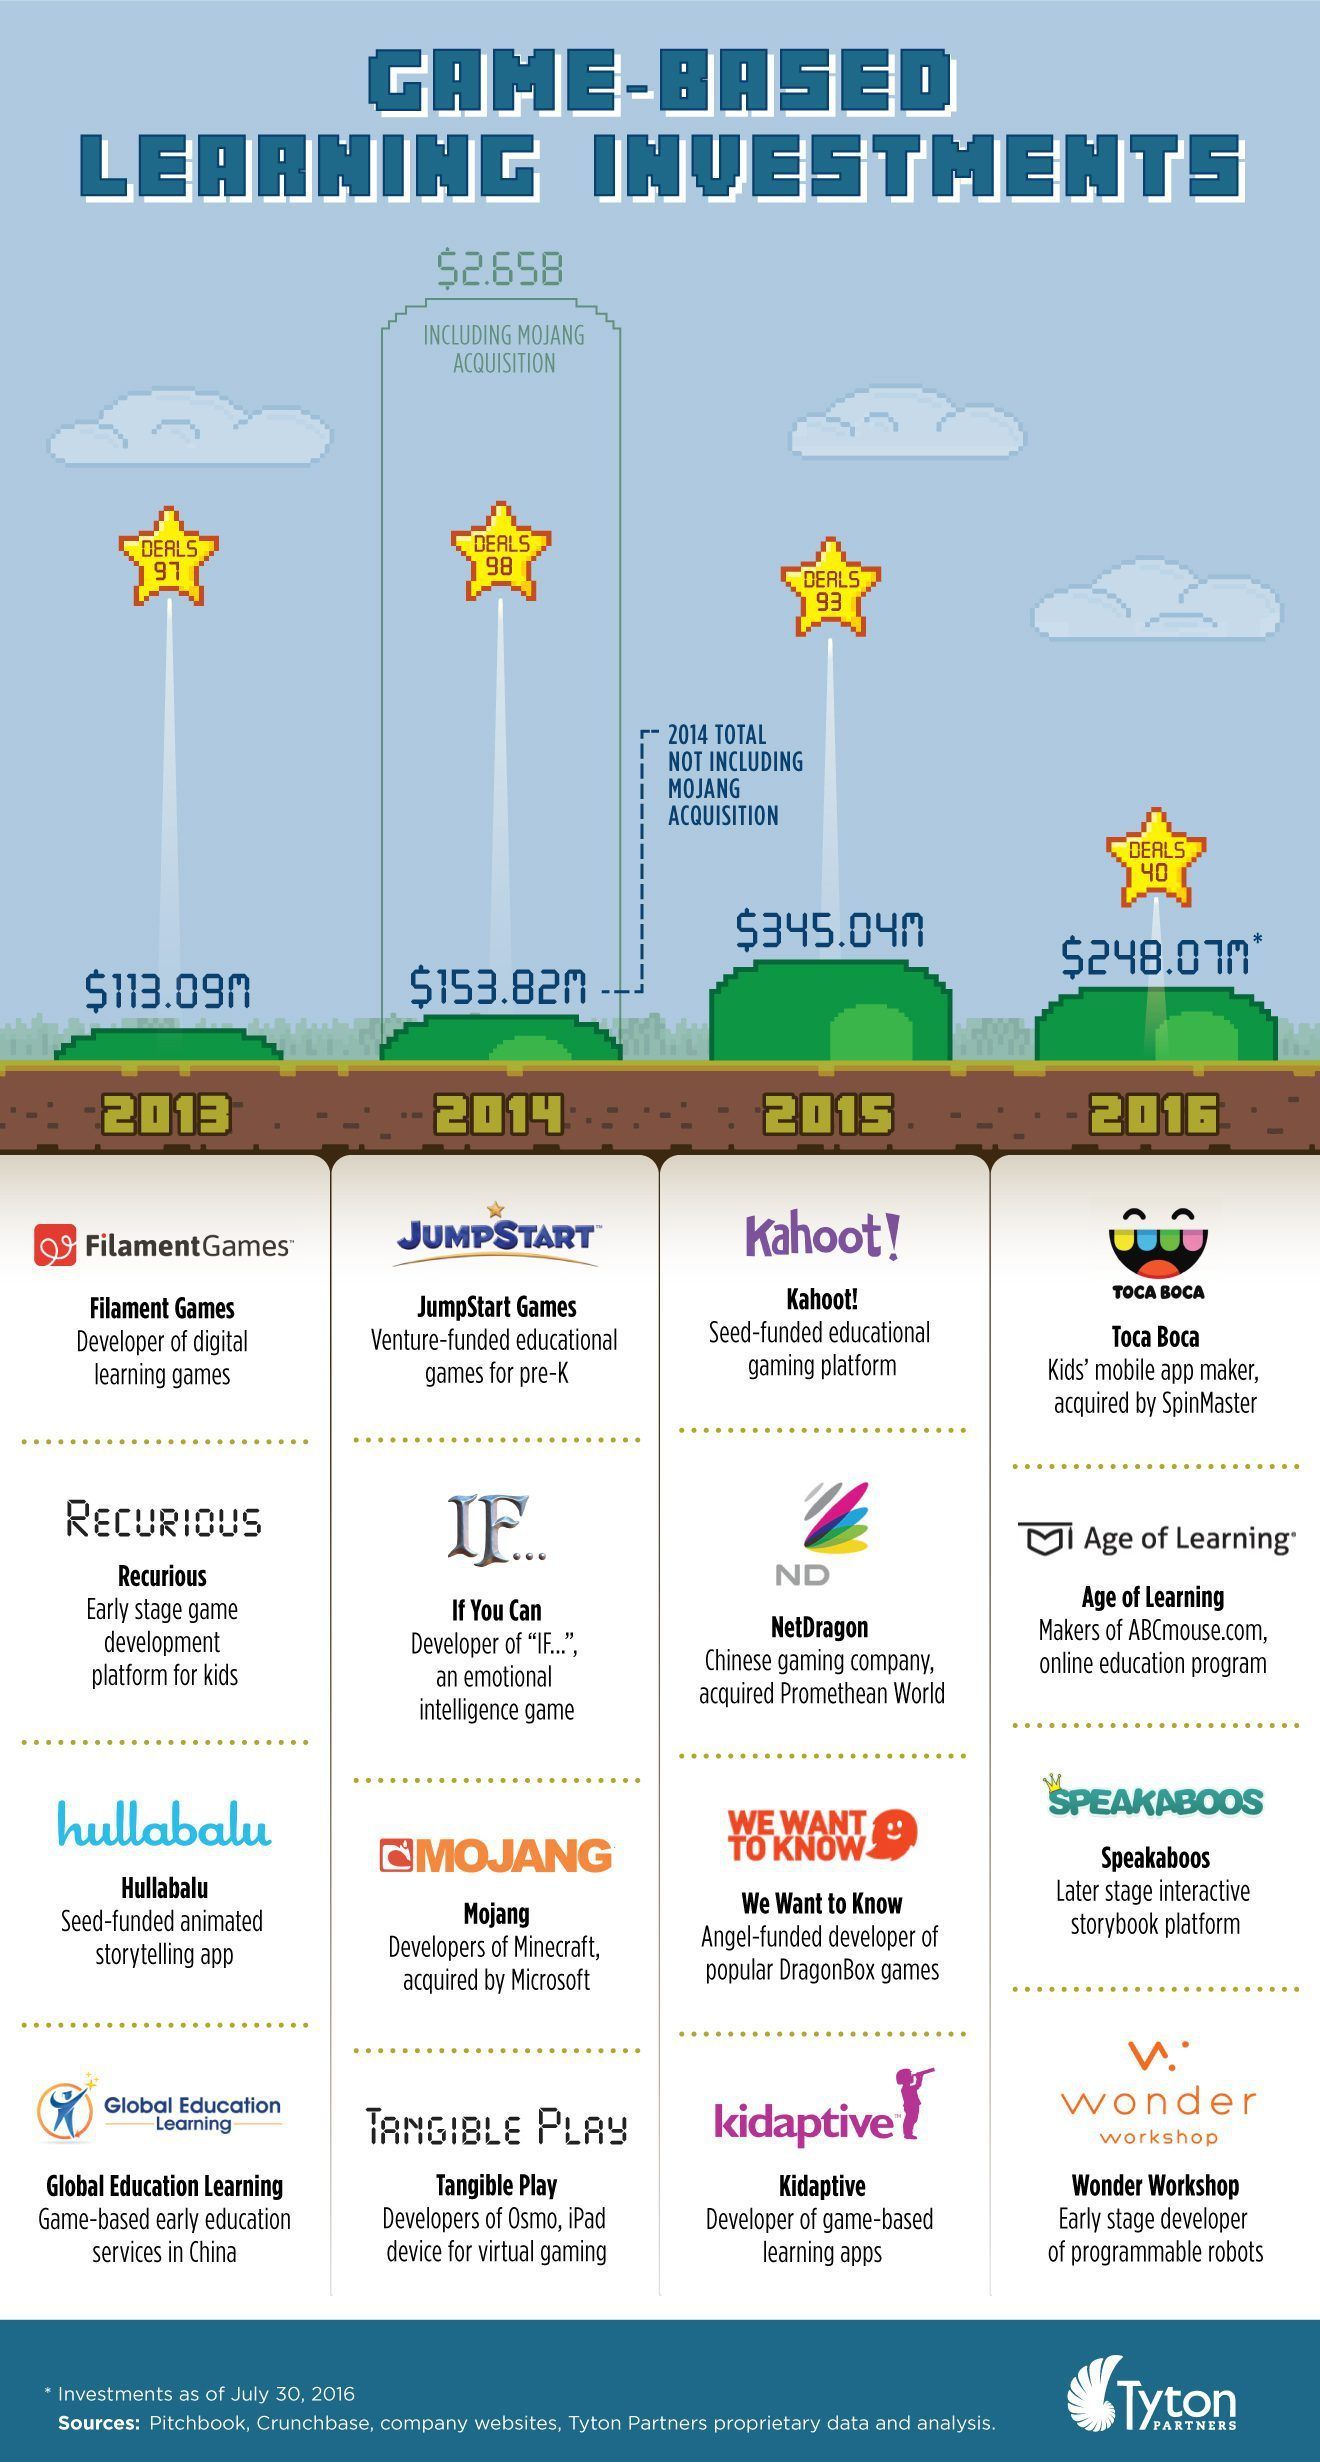 Game-based Learning Investments Infographic